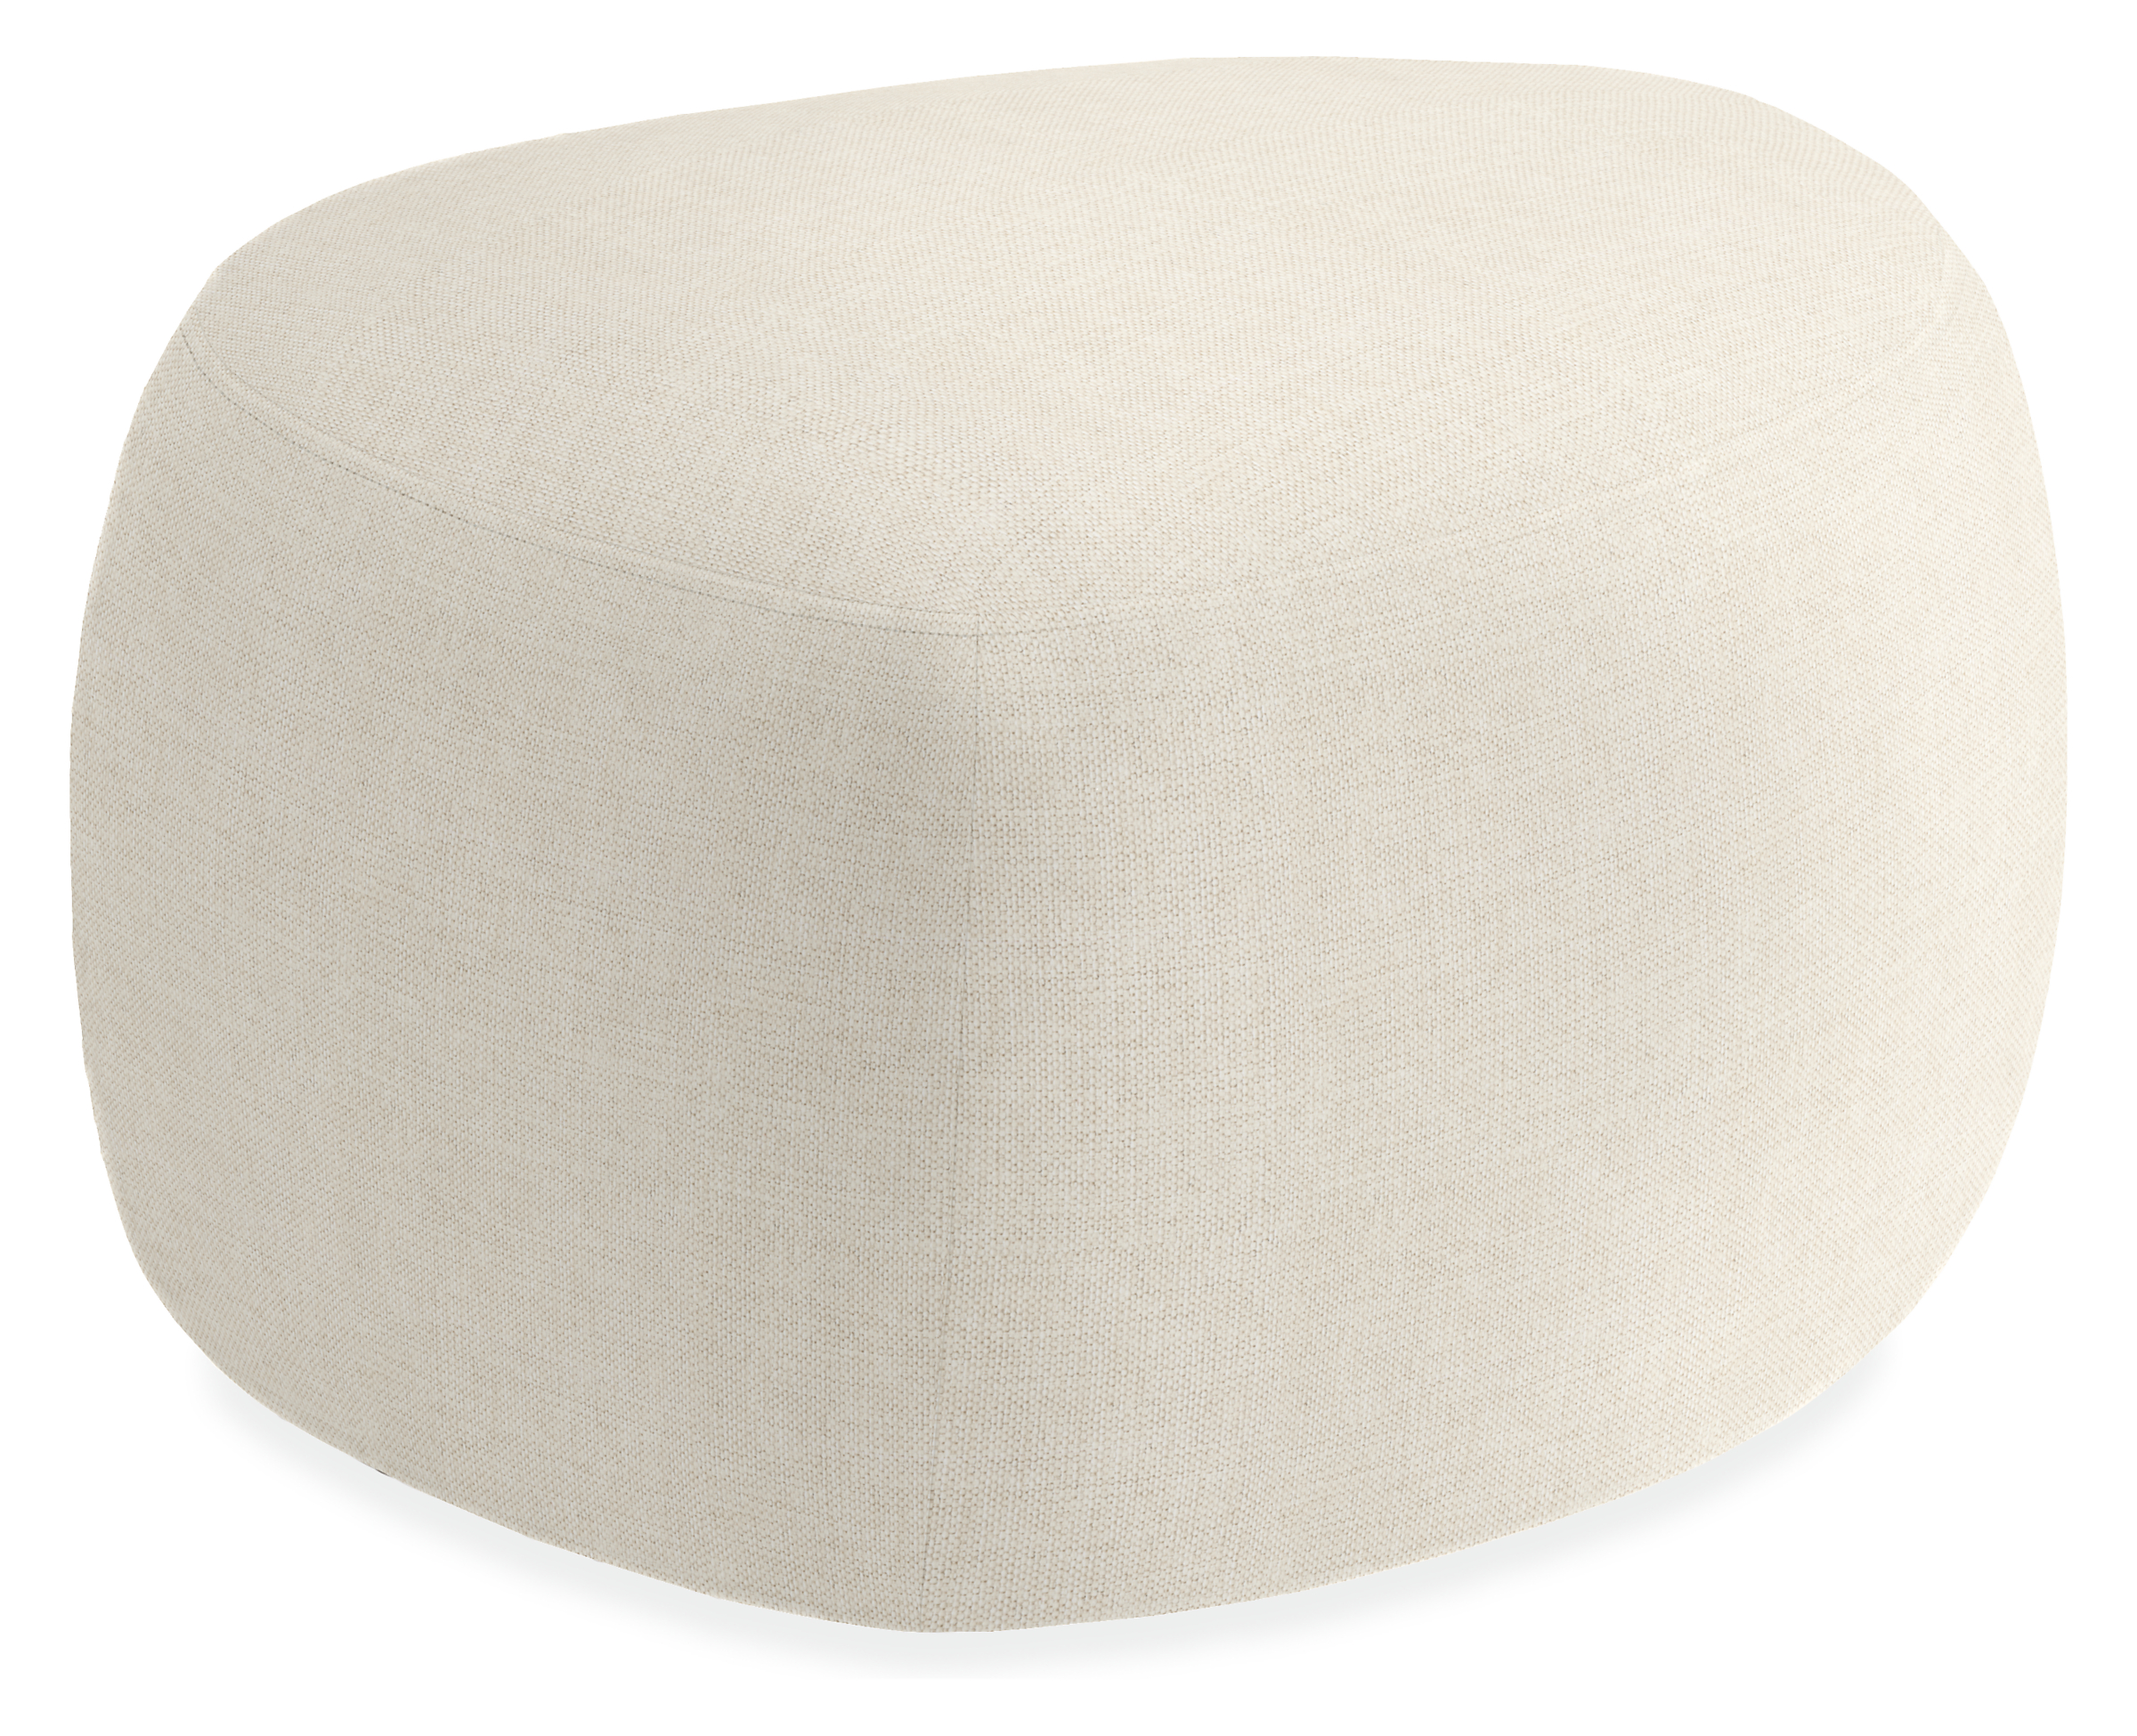 Asher 25w 20d 15h Ottoman in Sumner Ivory